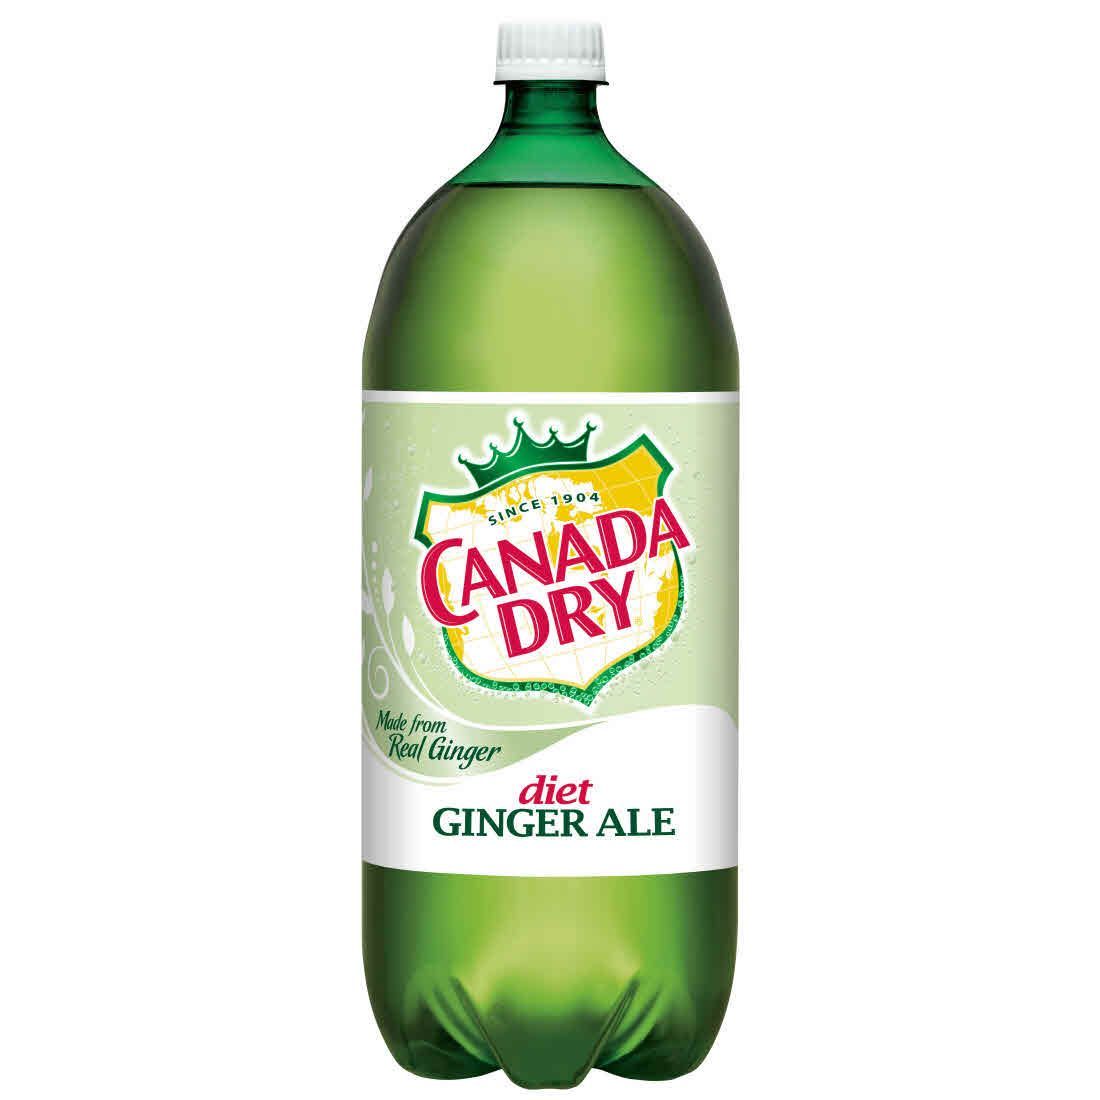 Canada Dry Diet Ginger Ale 2LTR